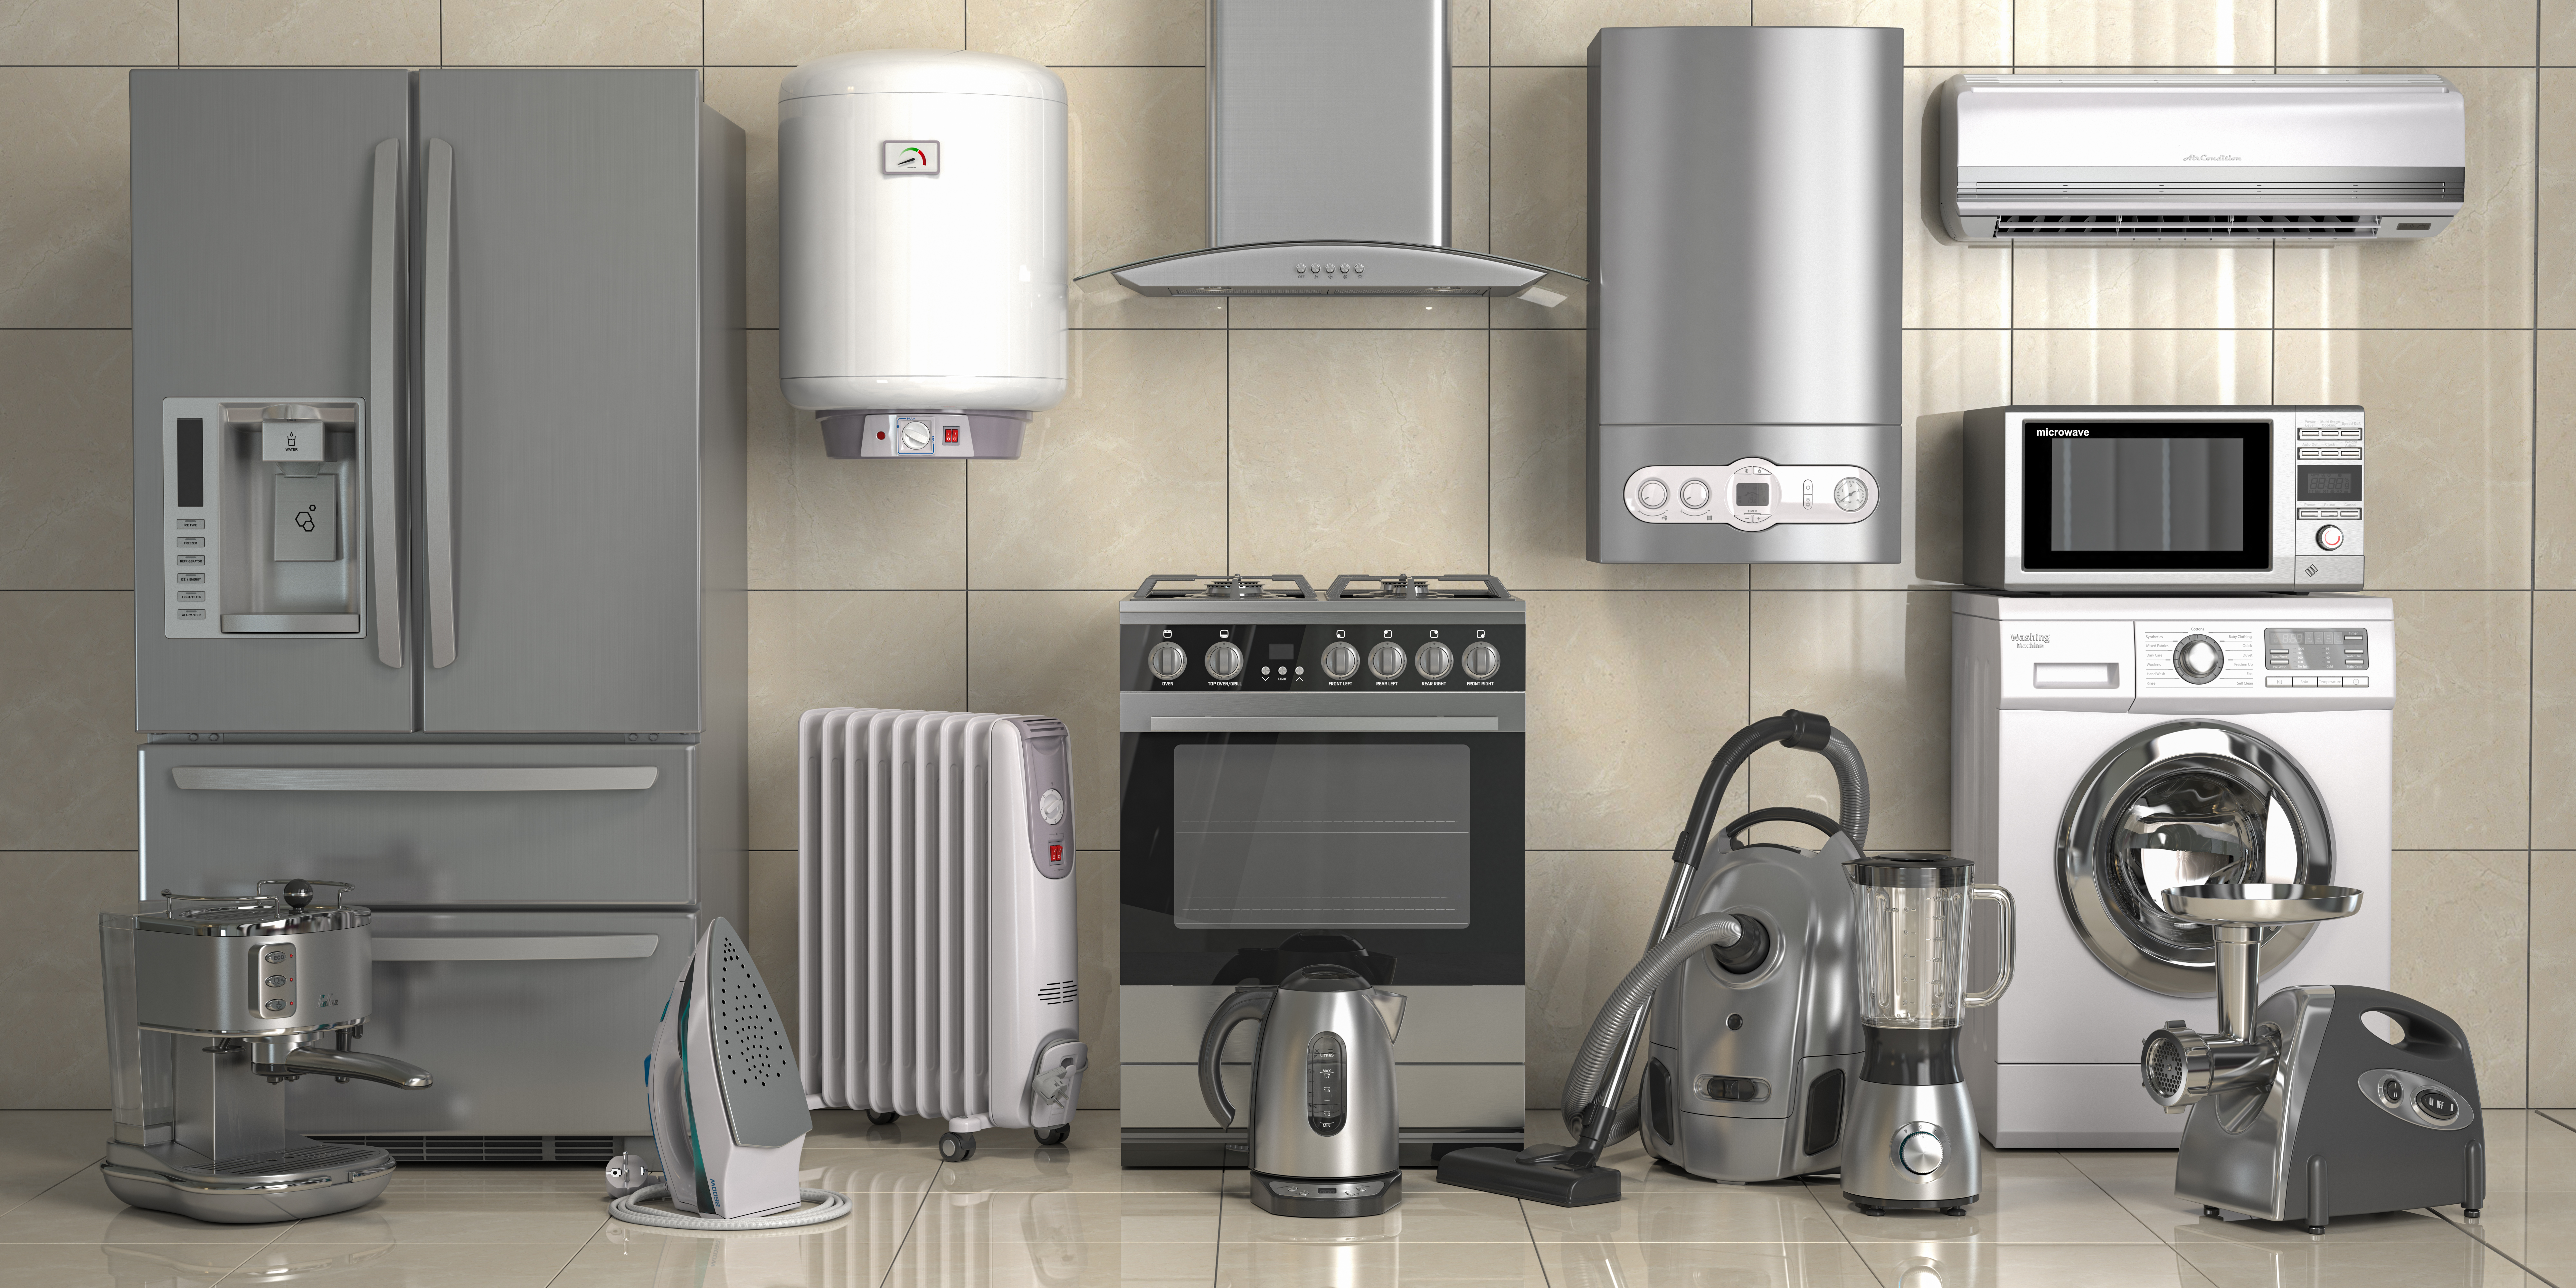 Best Kitchen Appliances (2022): What Are The Latest Trends? – Lomi